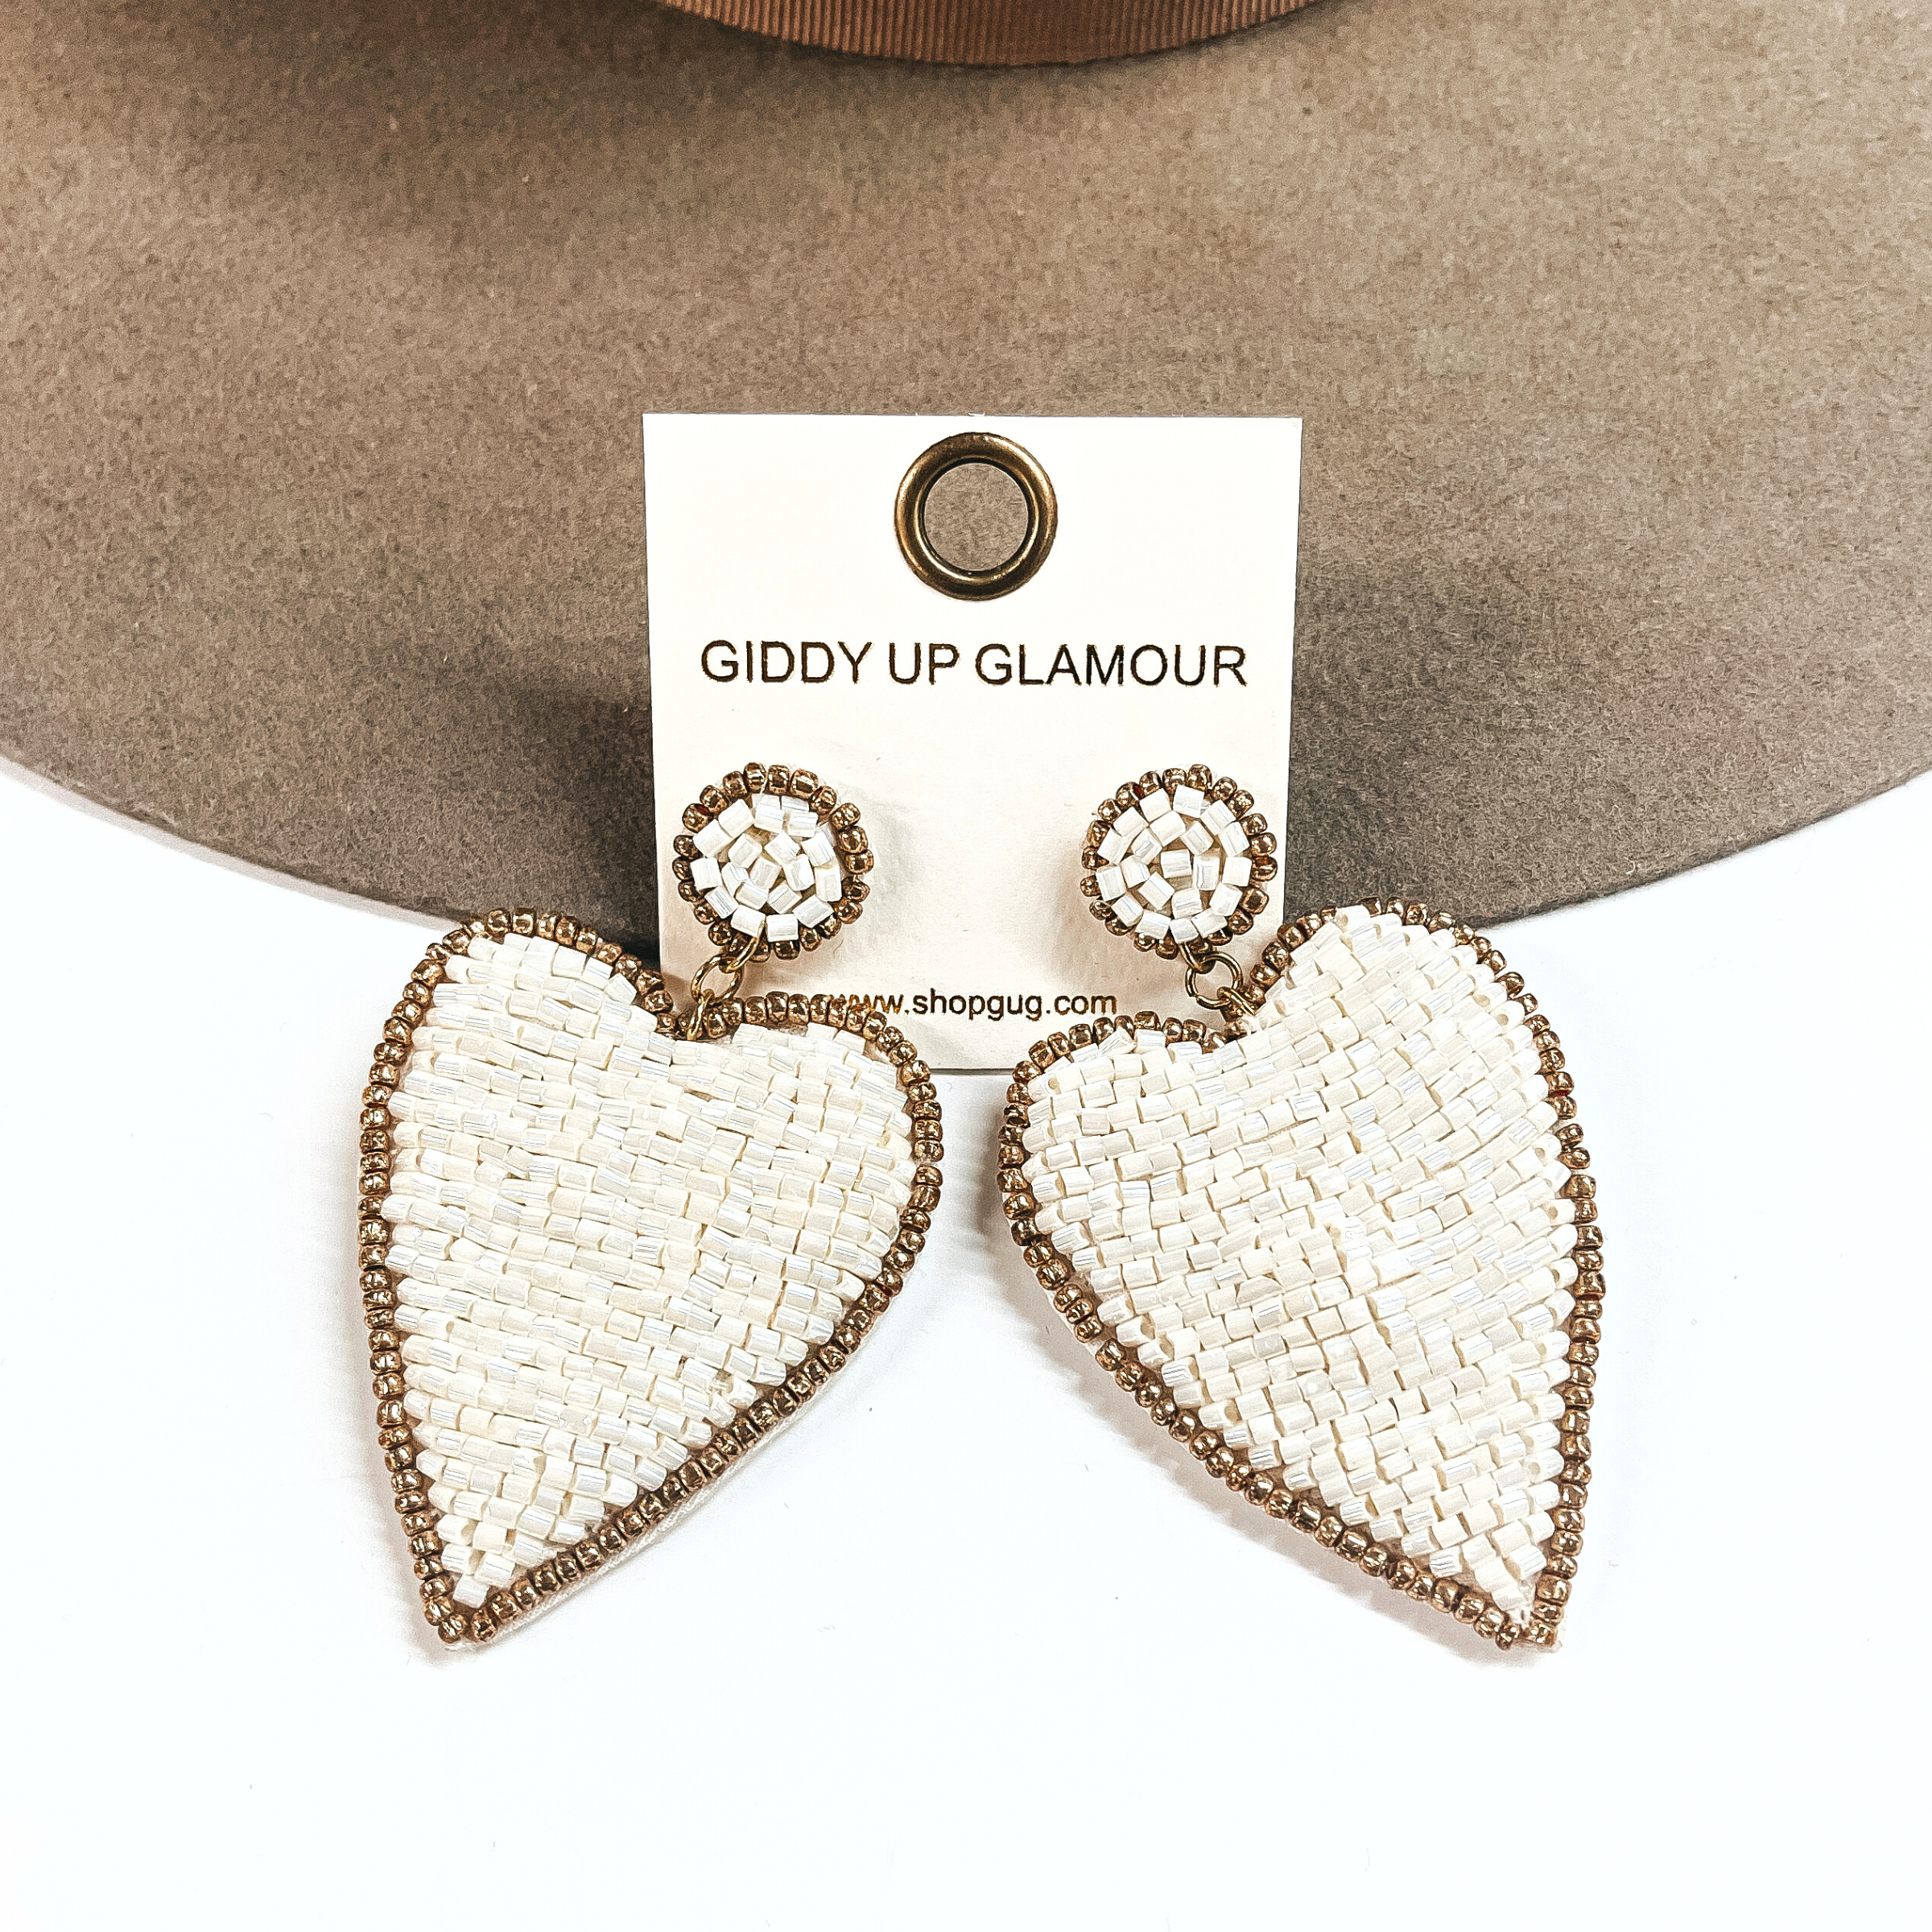 These are ivory and gold beaded earrings with a heart drop. There is a gold beaded outline. These earrings are taken leaning against a light brown felt hat brim and on a white background.